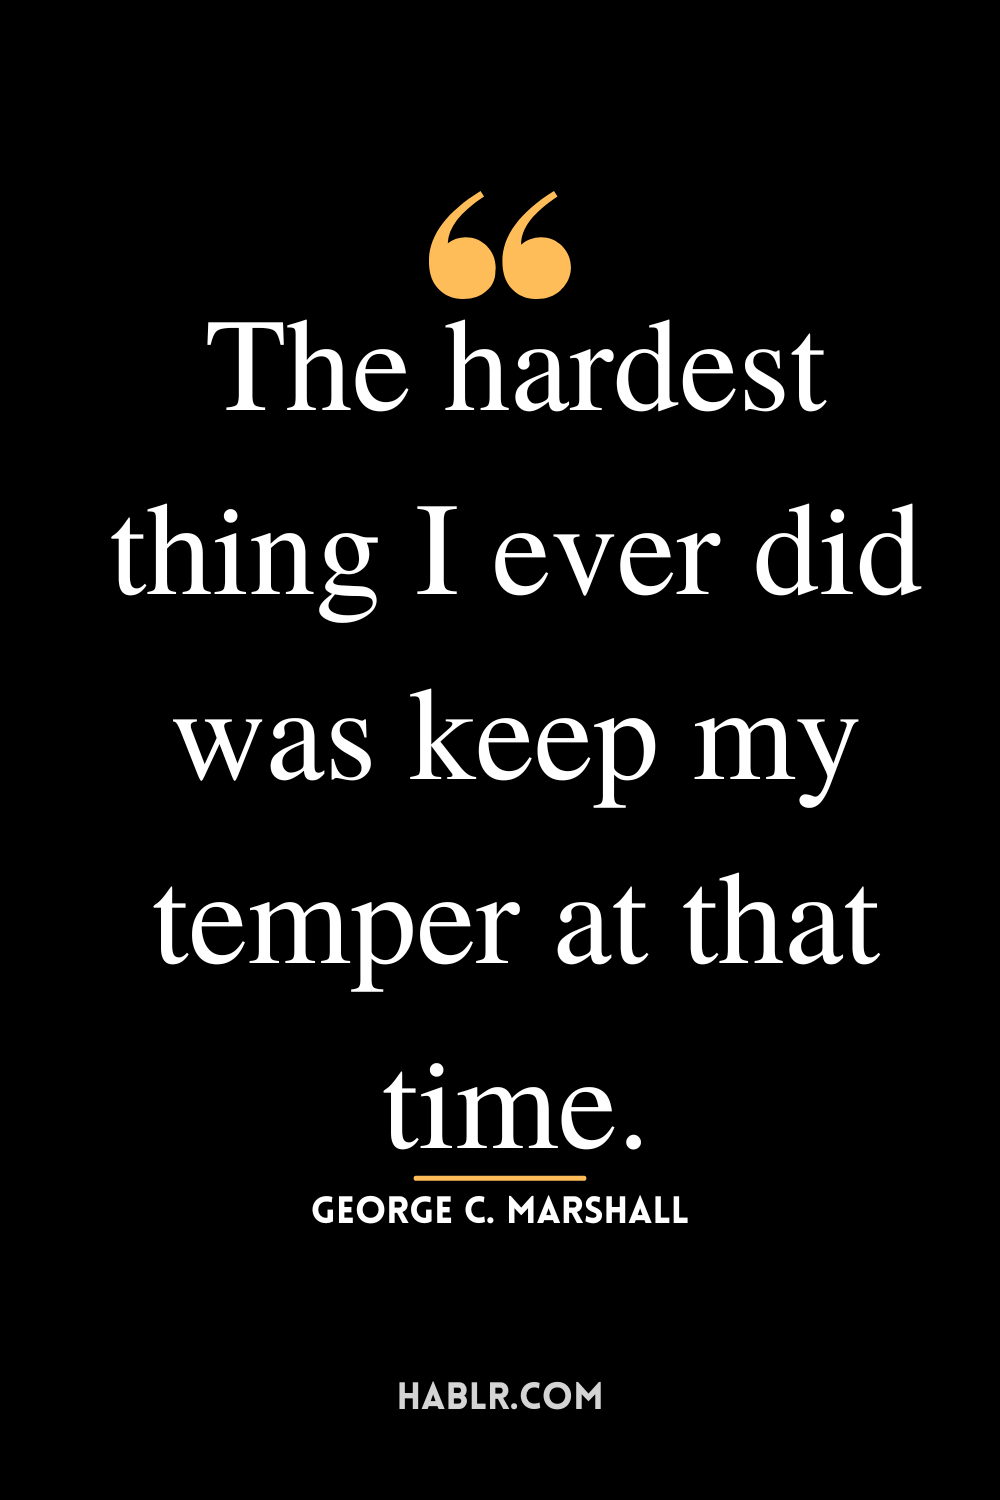 “The hardest thing I ever did was keep my temper at that time.”-George C. Marshall